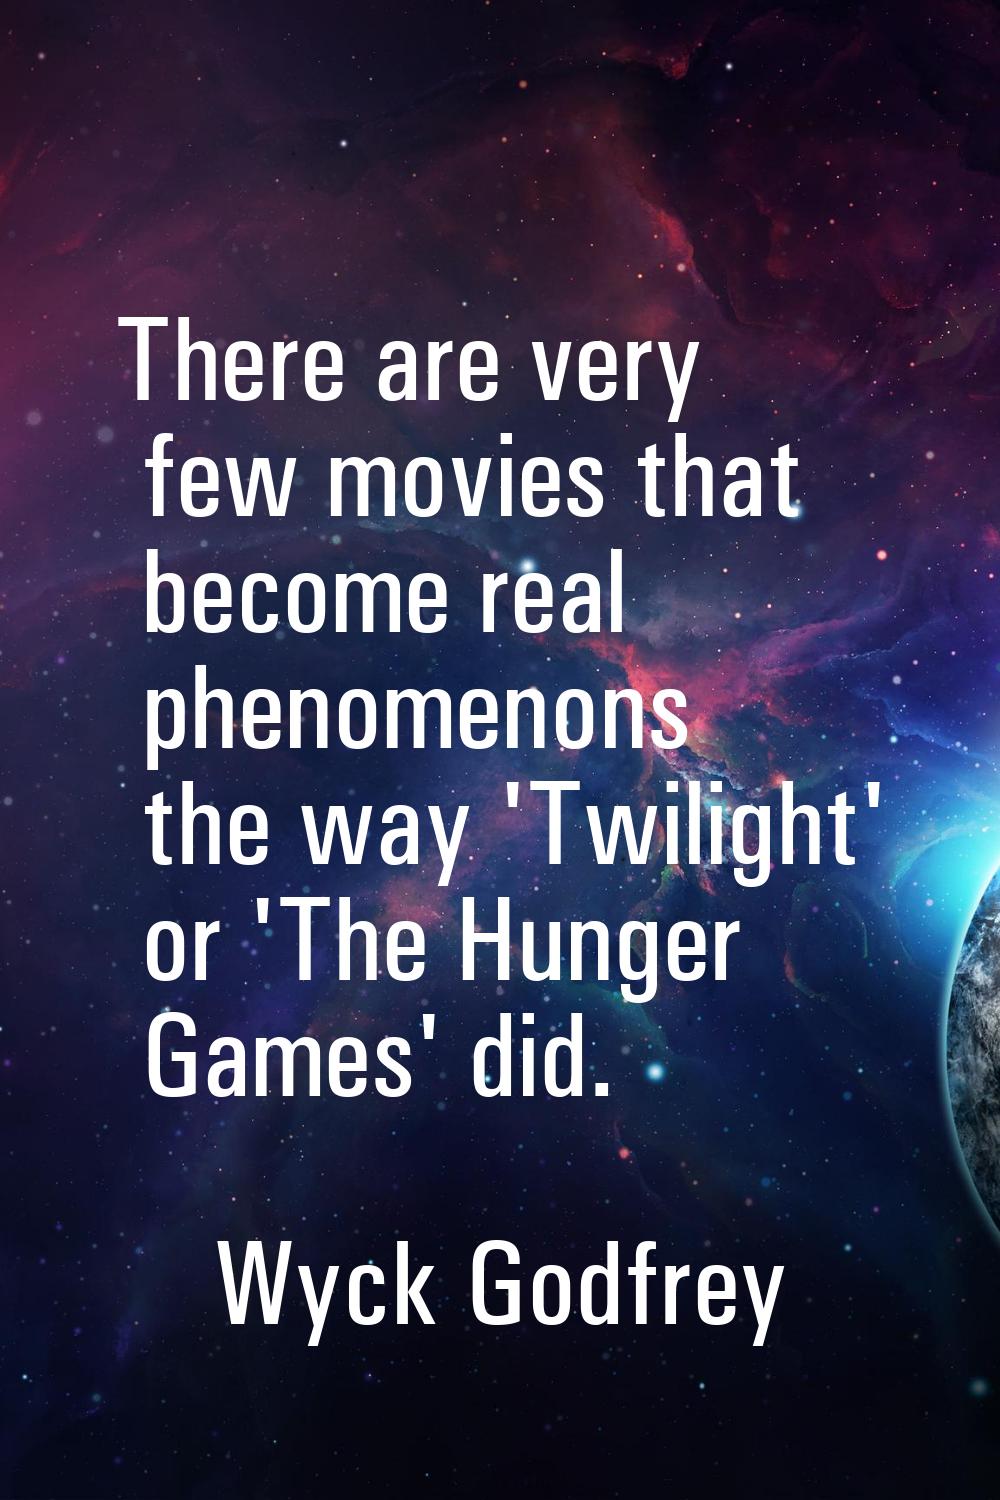 There are very few movies that become real phenomenons the way 'Twilight' or 'The Hunger Games' did